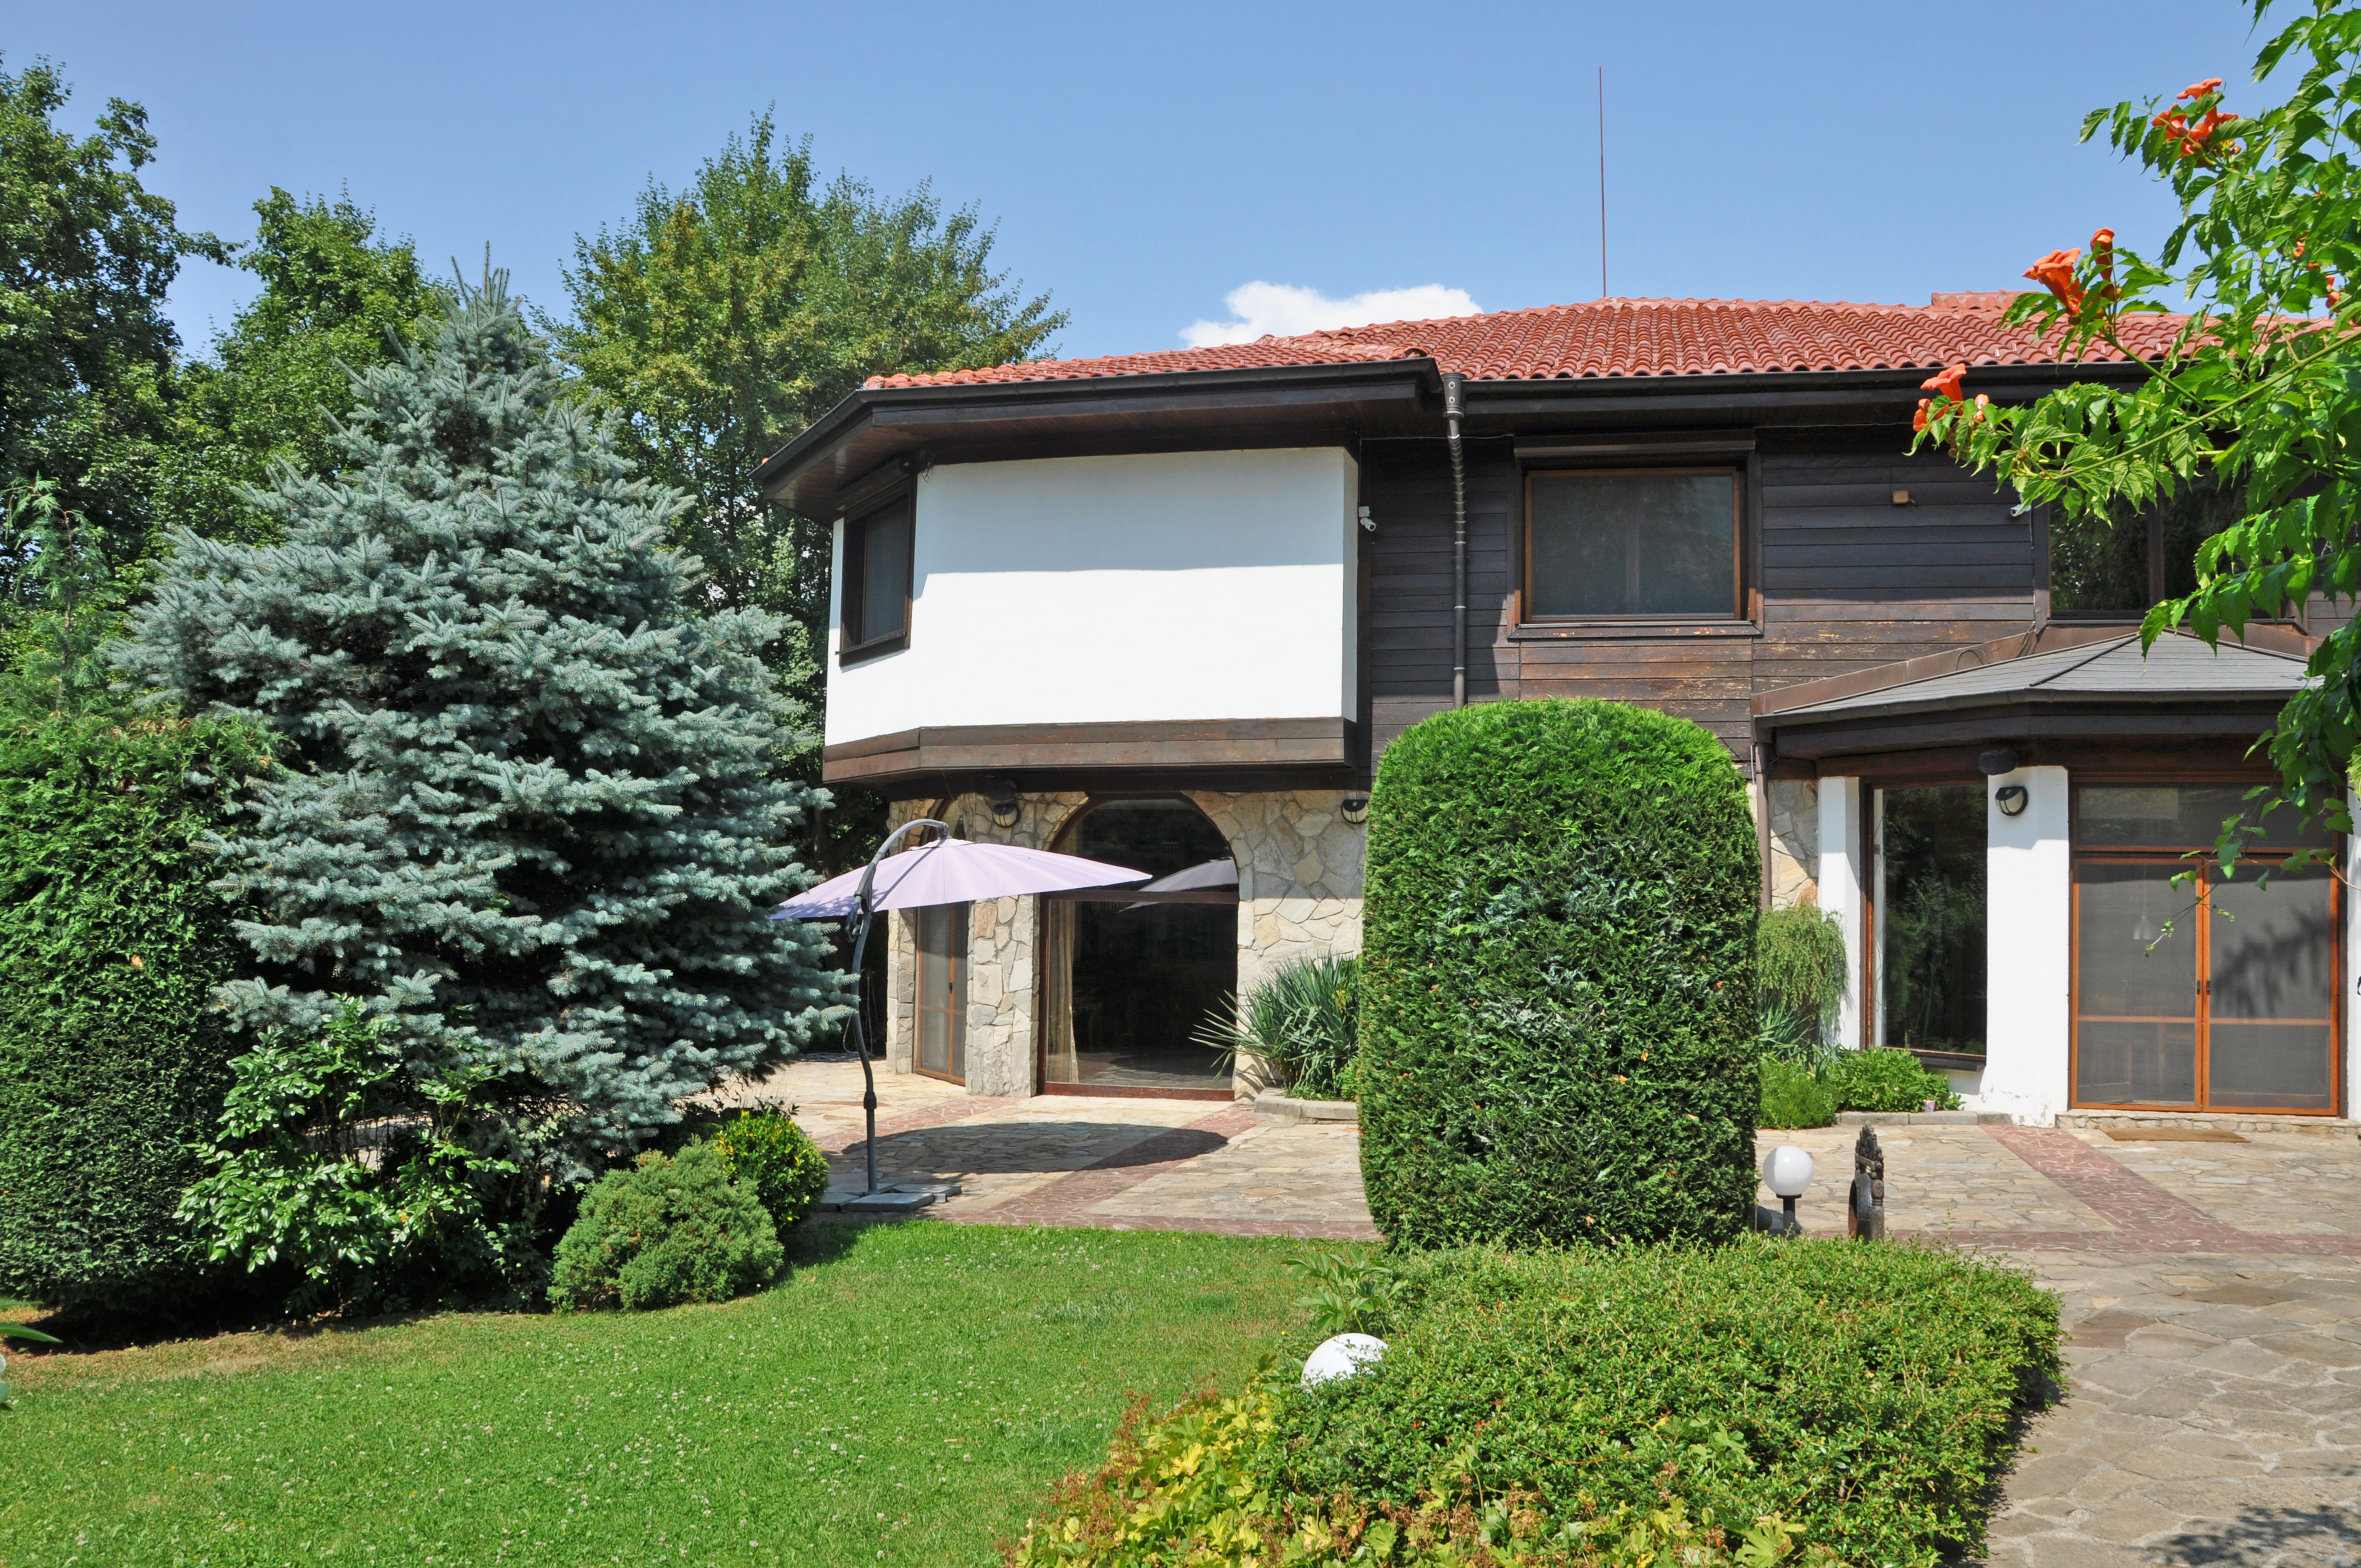 A perfect house with a well-maintained landscaped yard in Boyana